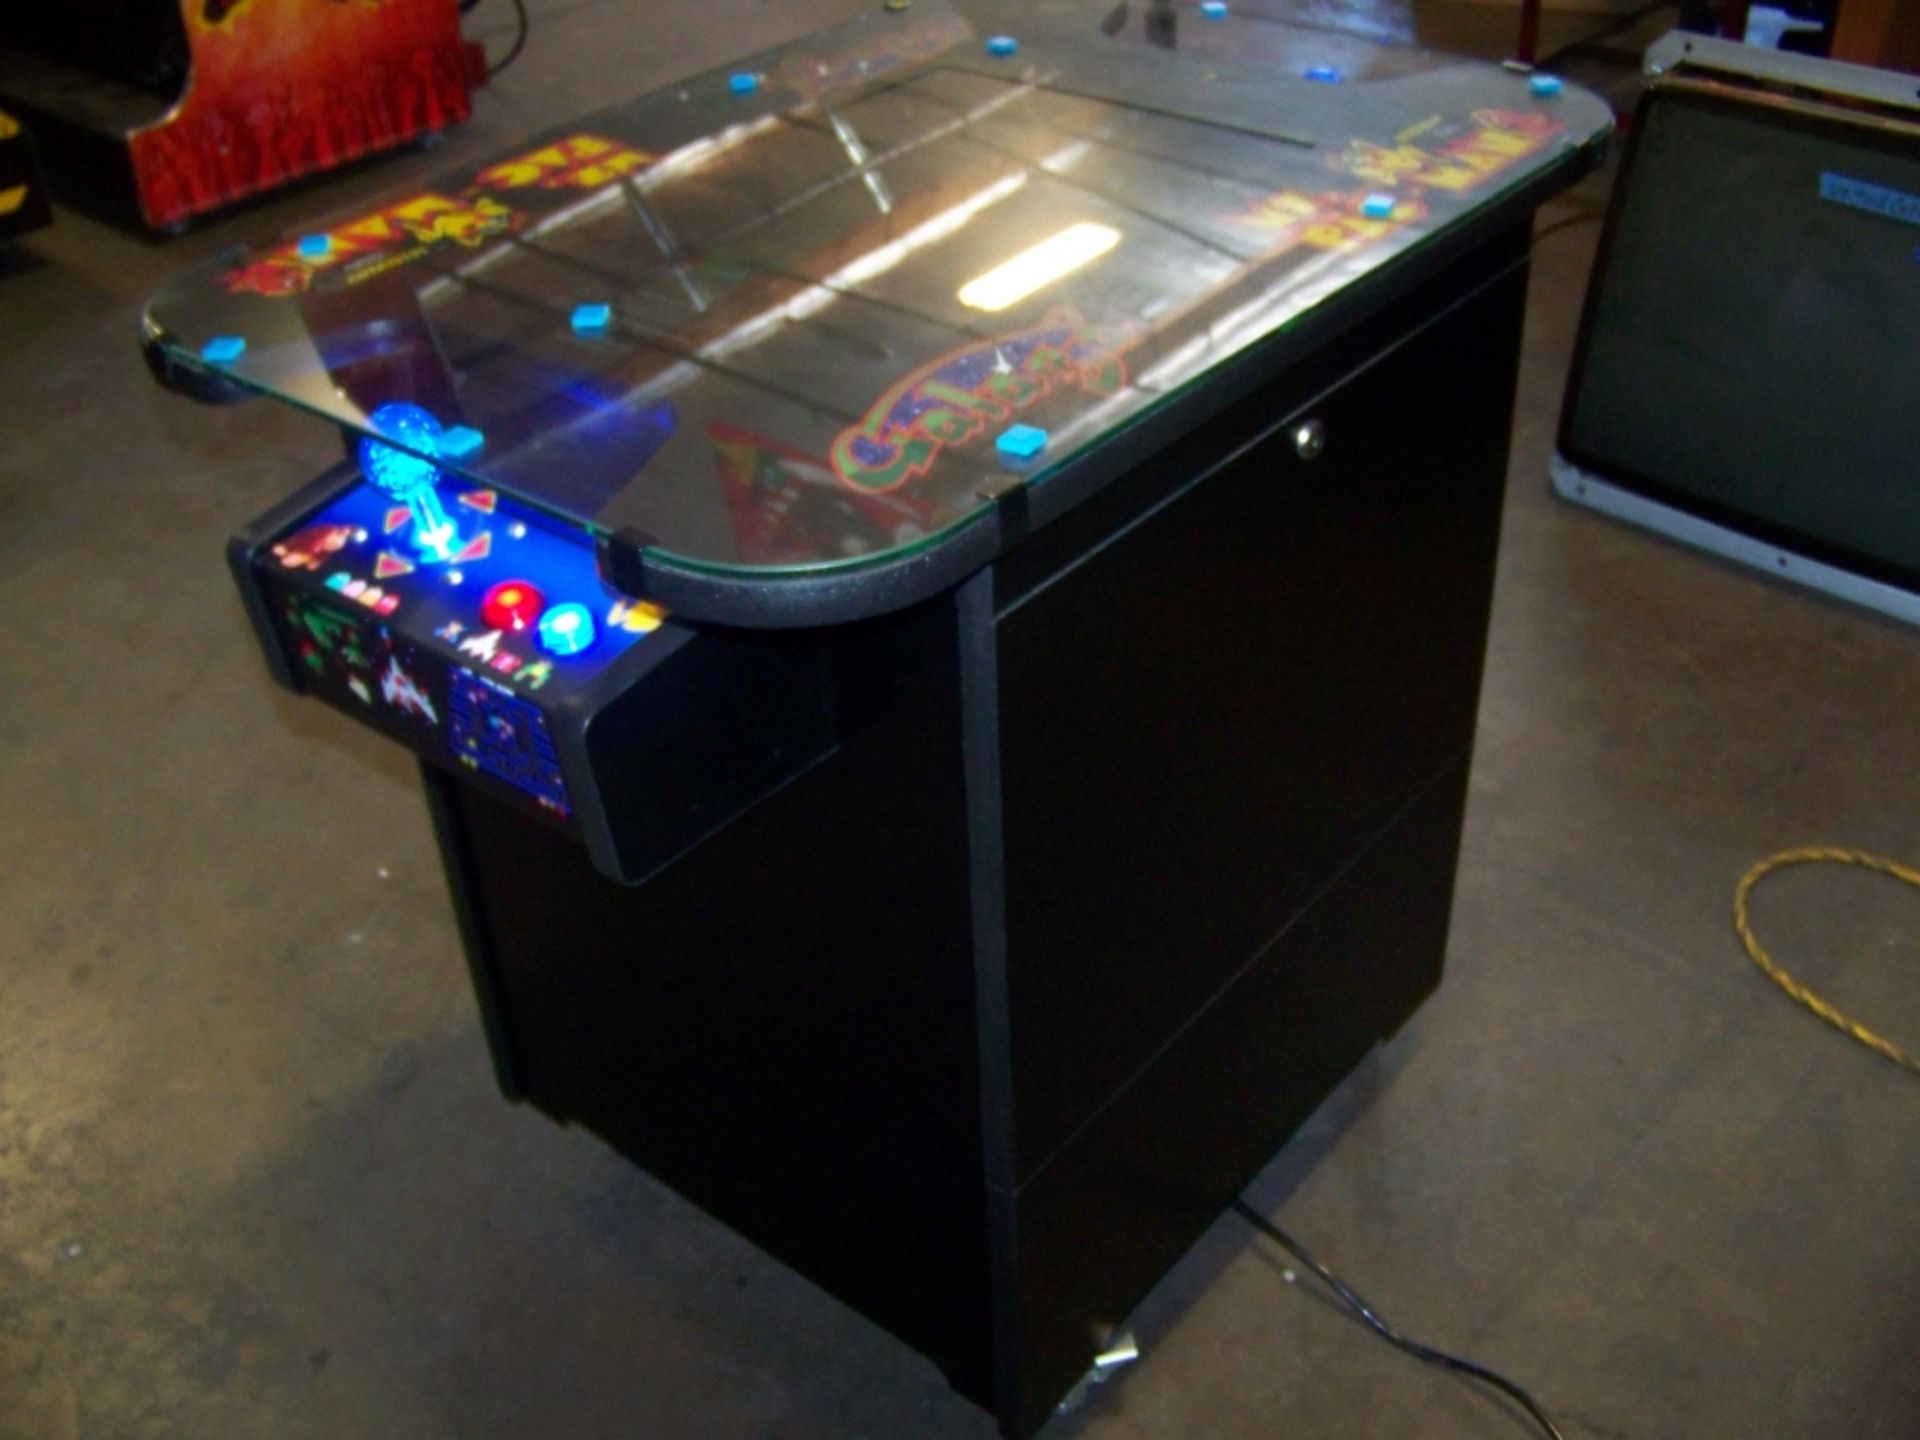 60 IN 1 BRAND NEW MULTICADE TABLE ARCADE L@@K!!! - Image 5 of 5